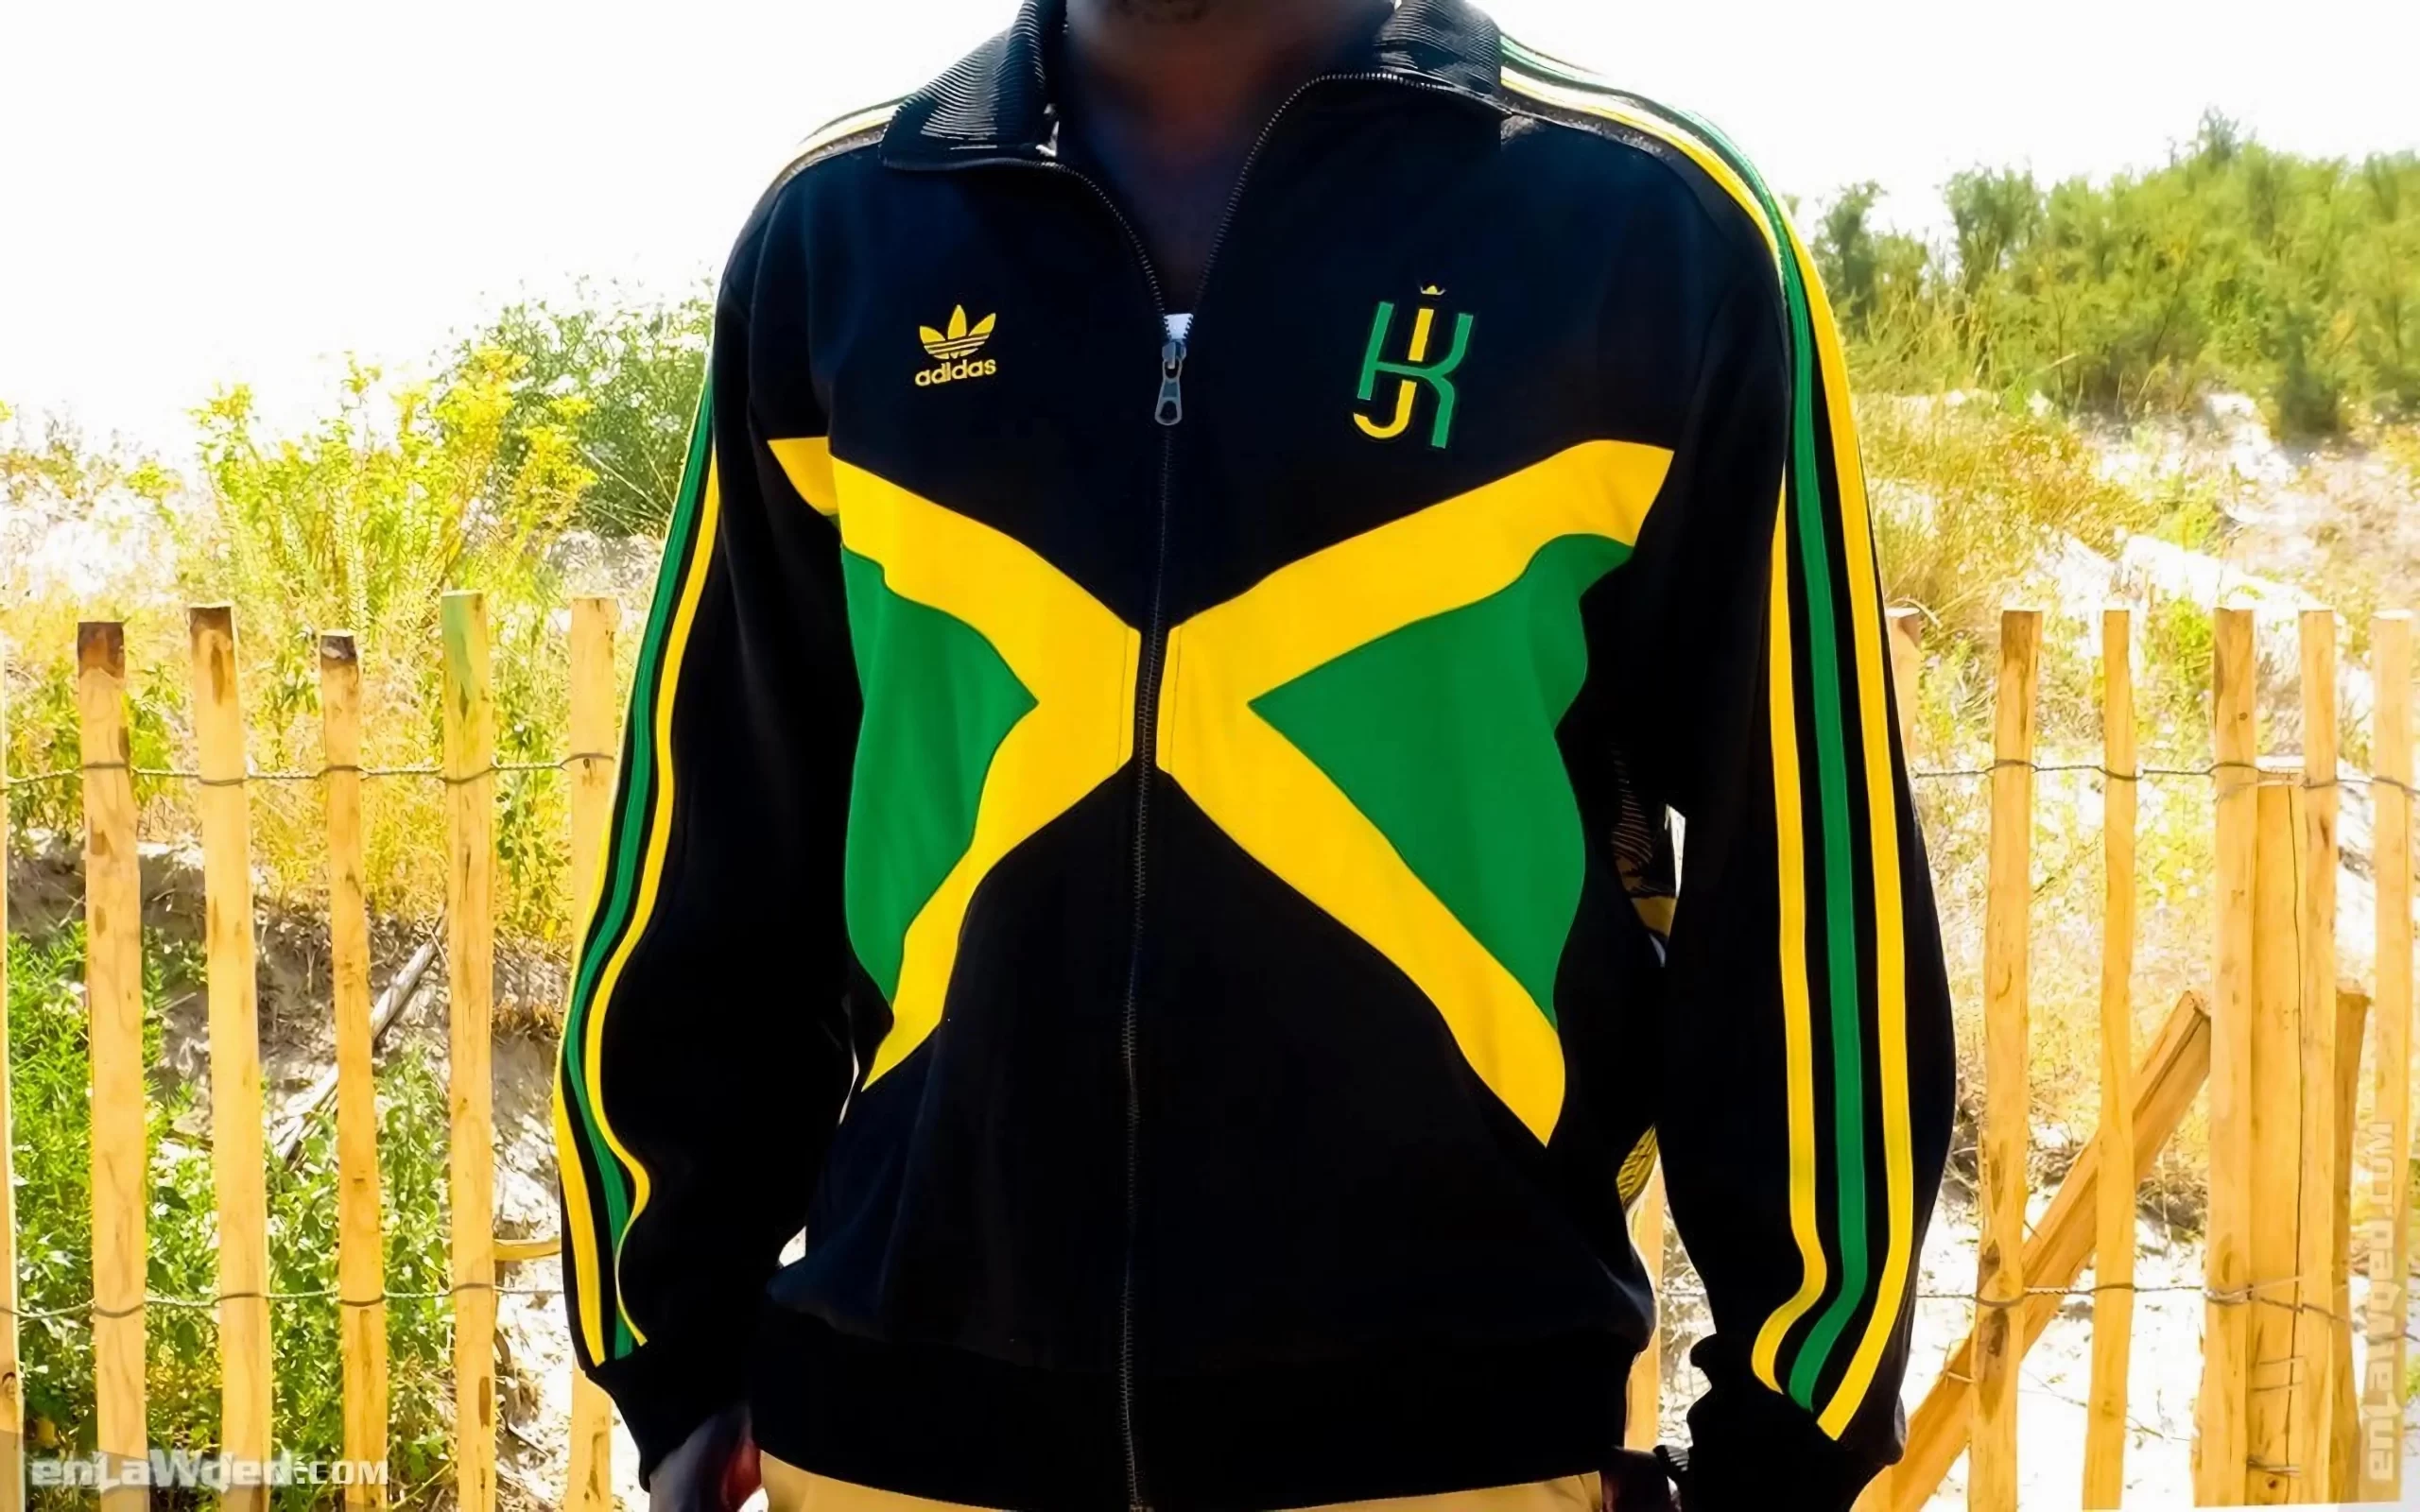 Men’s 2006 Kingston Jamaica TT by Adidas Originals: Blessed (EnLawded.com file #lmc3l9mwyvylqe9wo9)